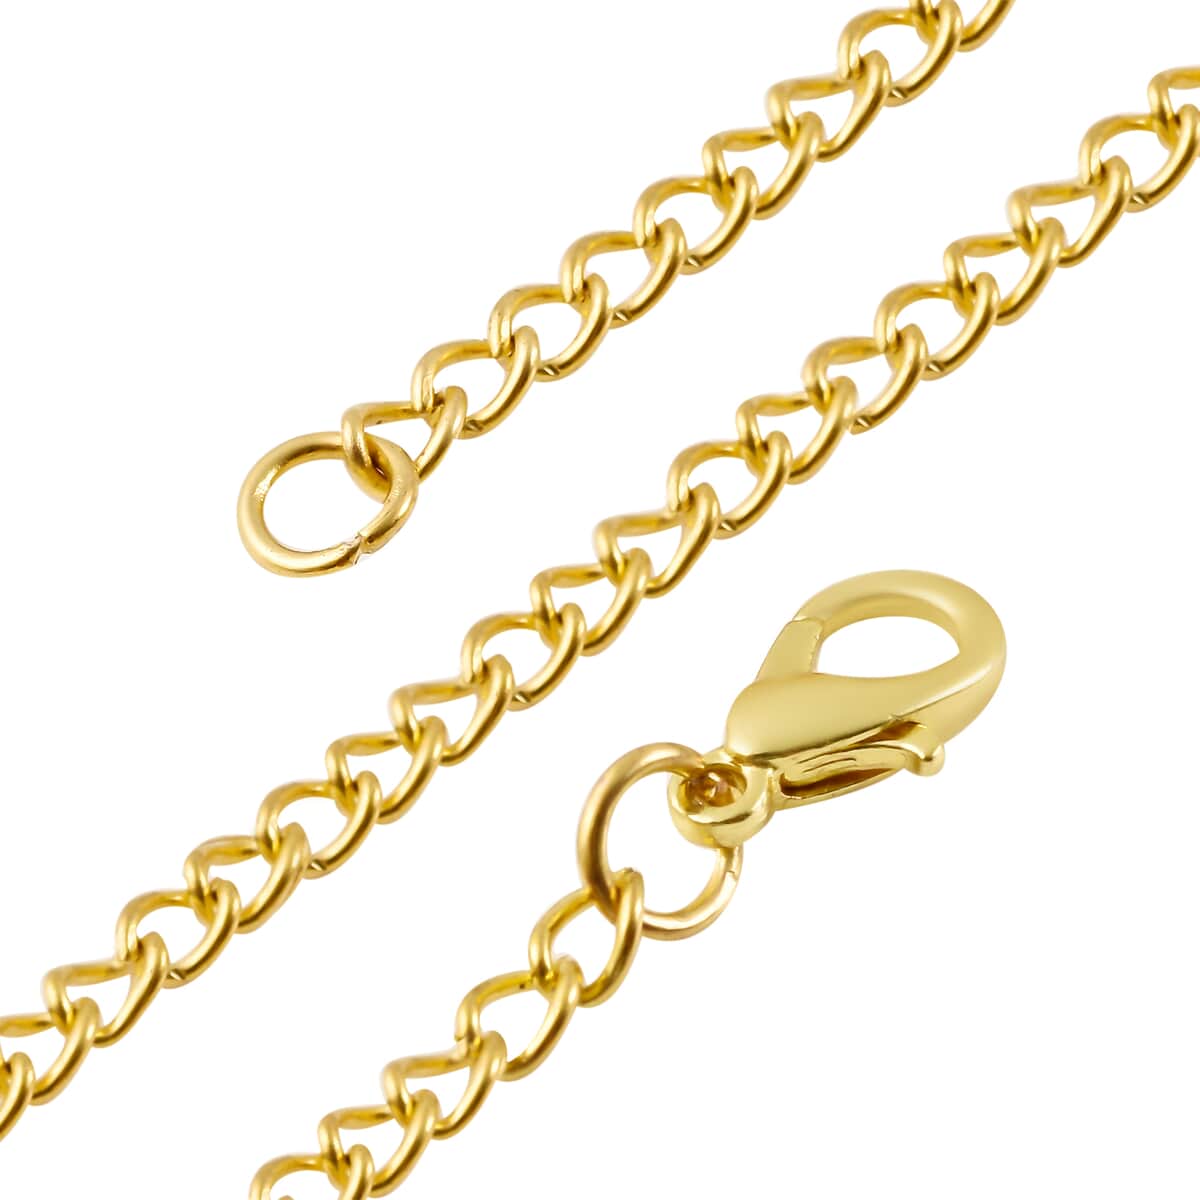 Strada Japanese Movement Poodle Pocket Watch in Goldtone with Chain (31 Inches) image number 6